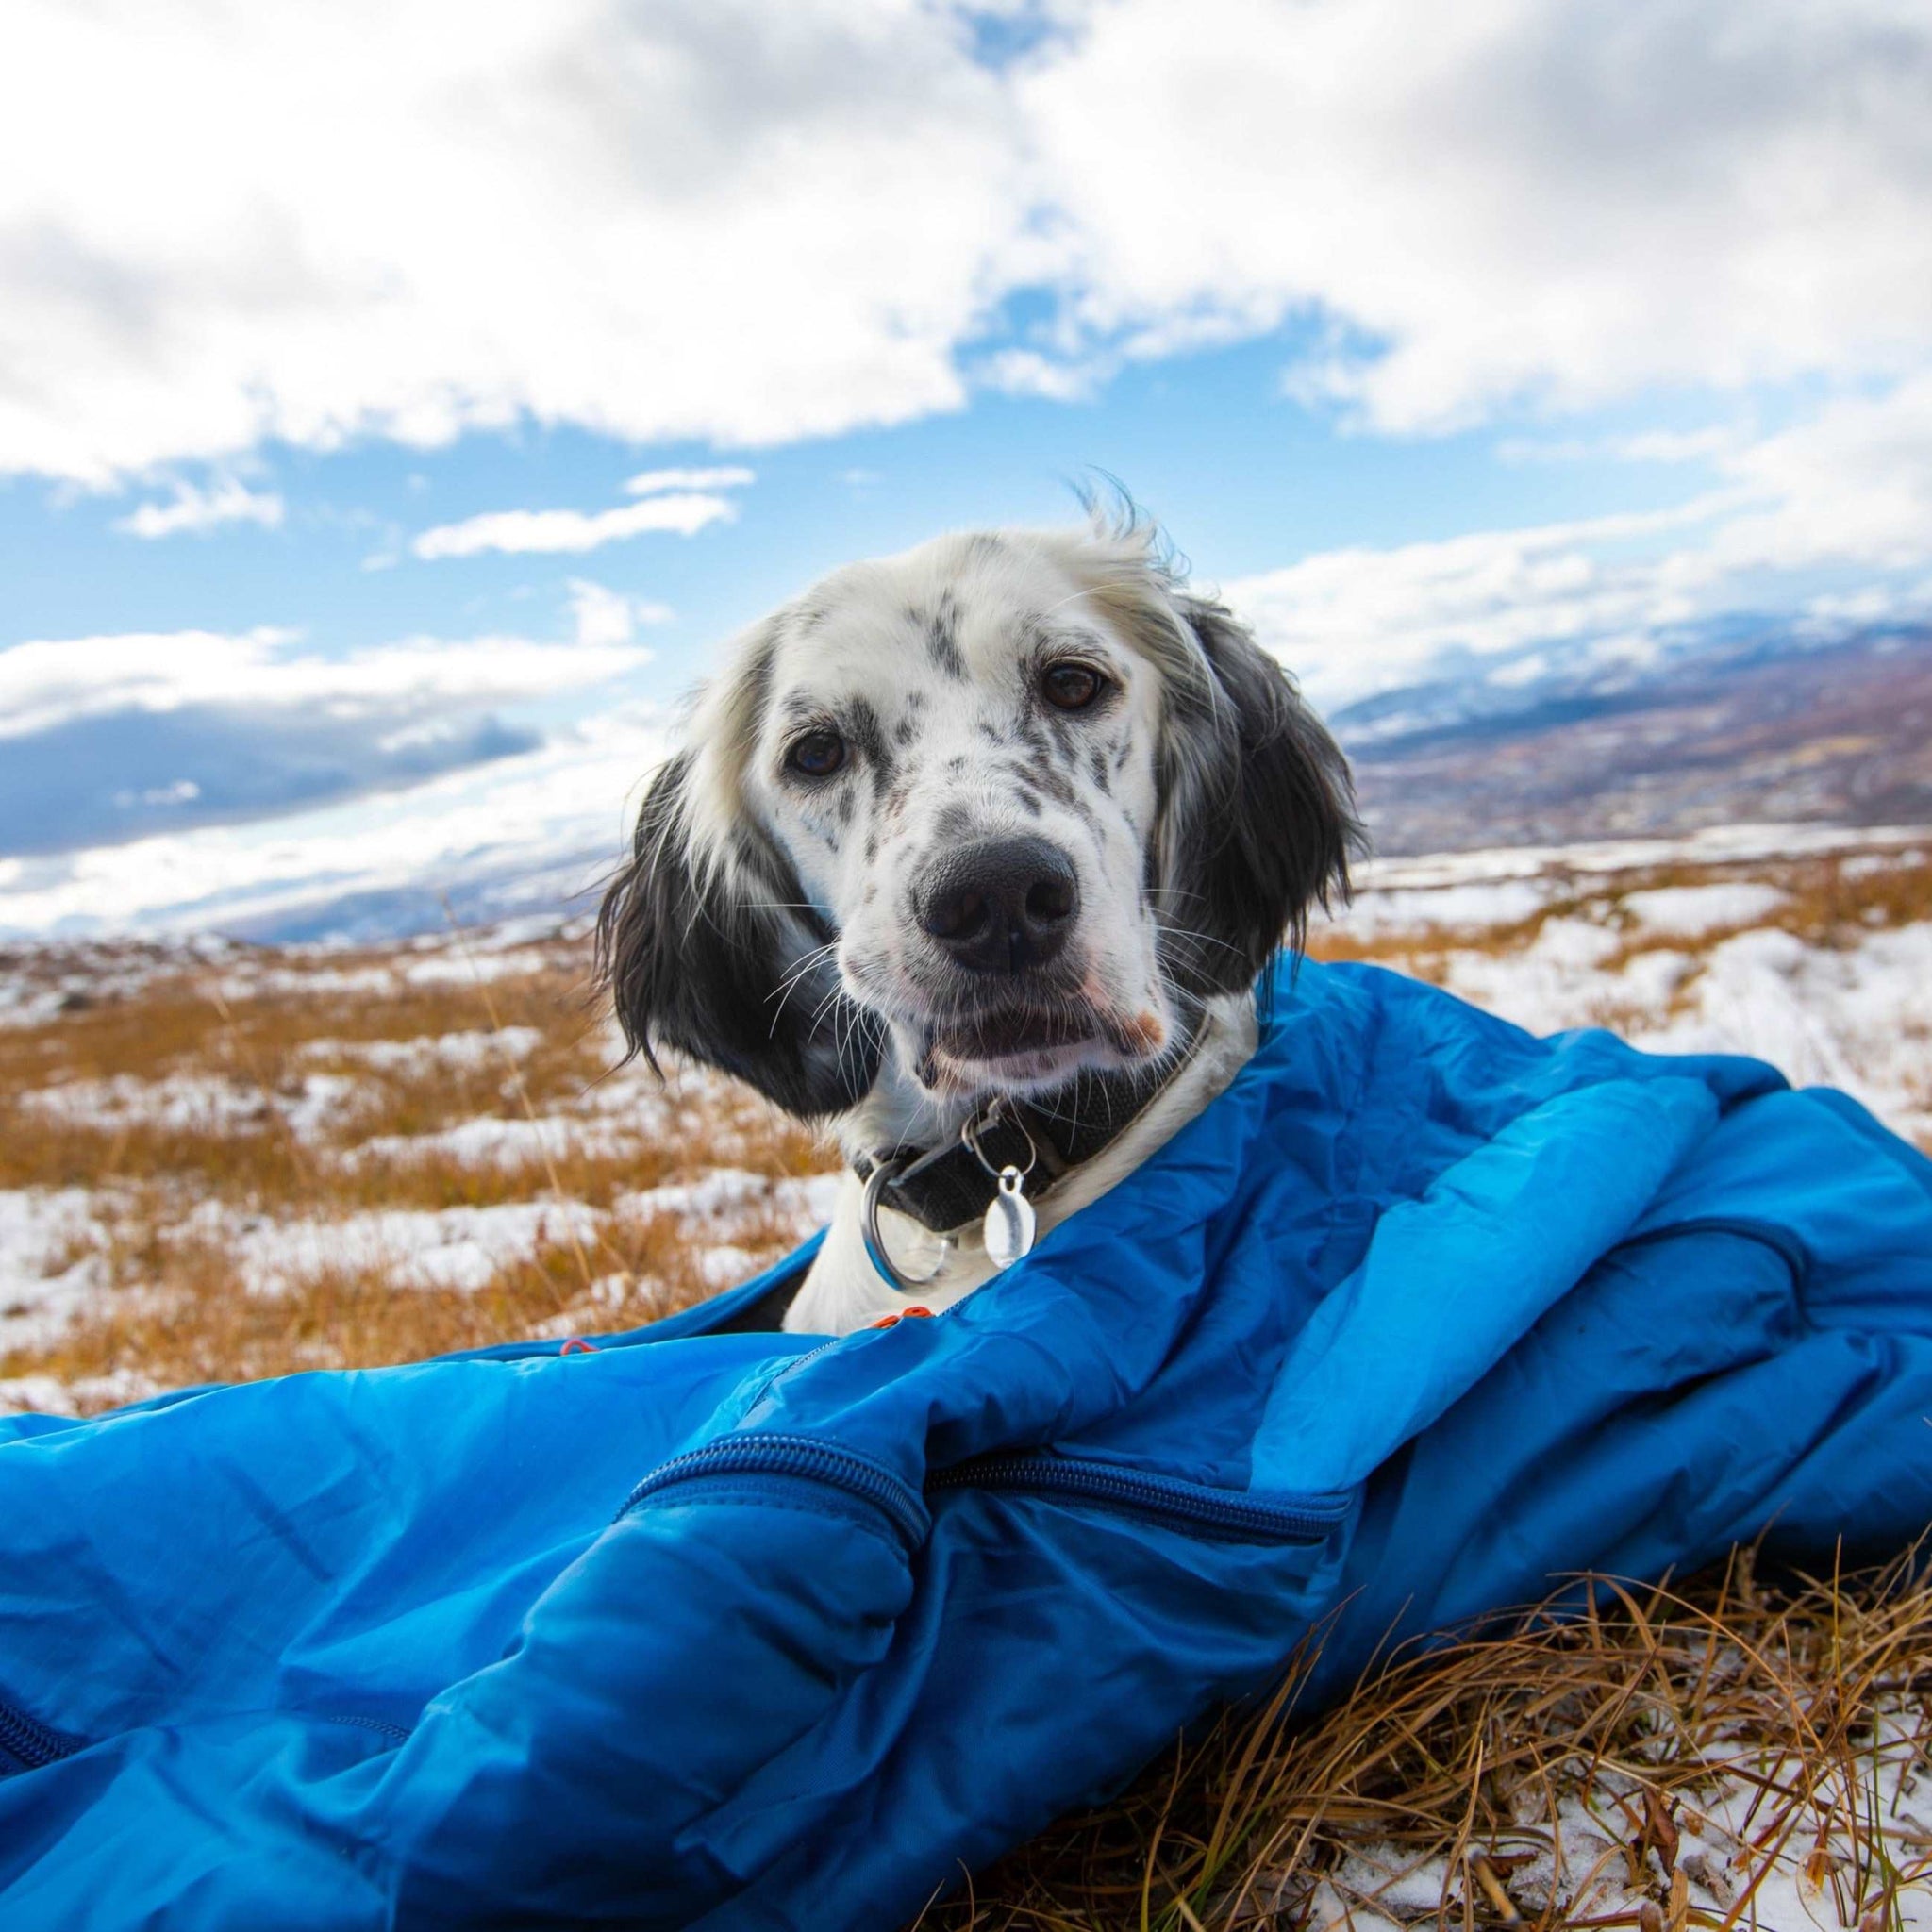 Black and white dog in blue sleeping bag on snowy hilltop